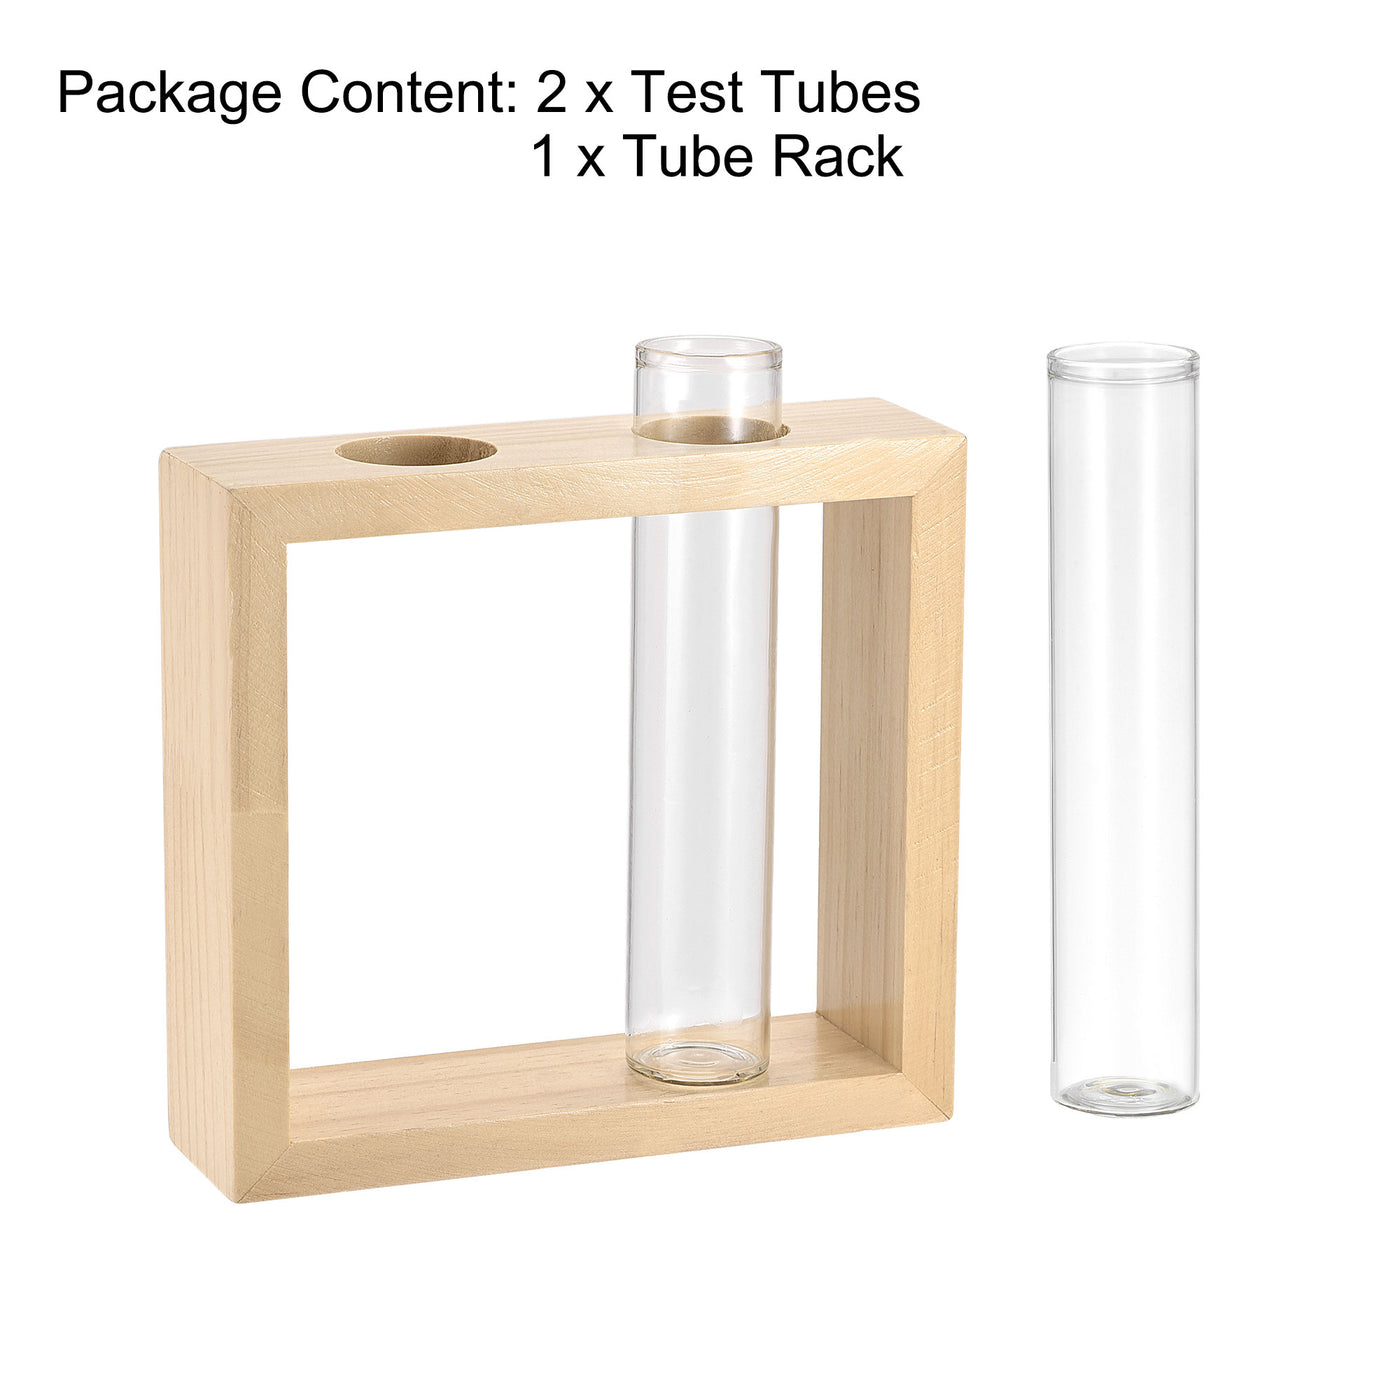 uxcell Uxcell 2Pcs Glass Test Tubes with 2-Wells Wooden Tube Rack, Flat Base, 30x150mm, Storage Container for Scientific Experiments